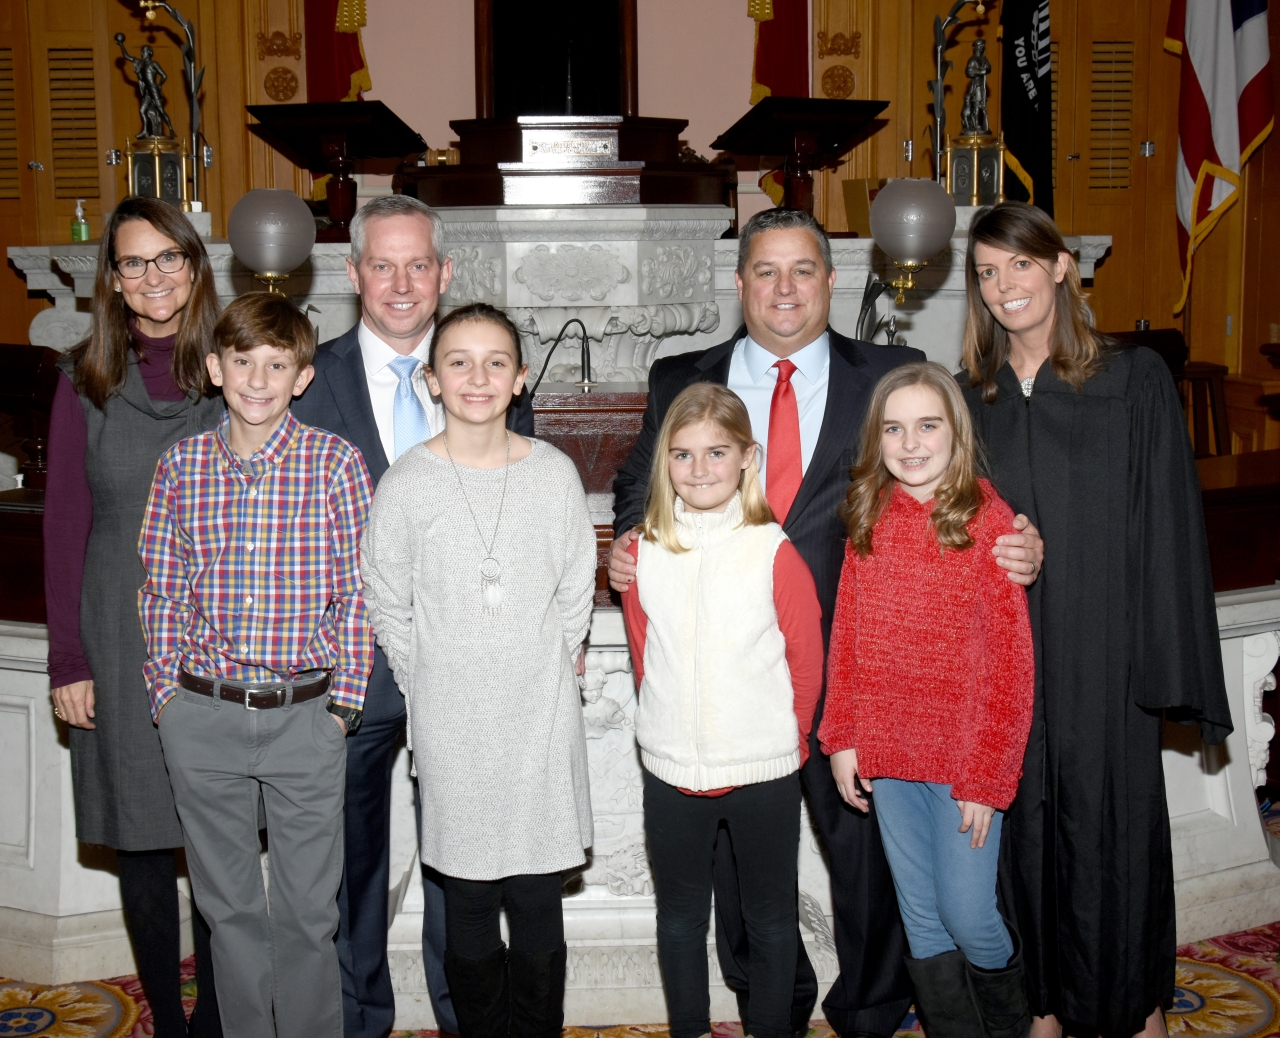 Rep. LaRe and Rep. Wilkin with their families on Opening Day of the 134th General Assembly.